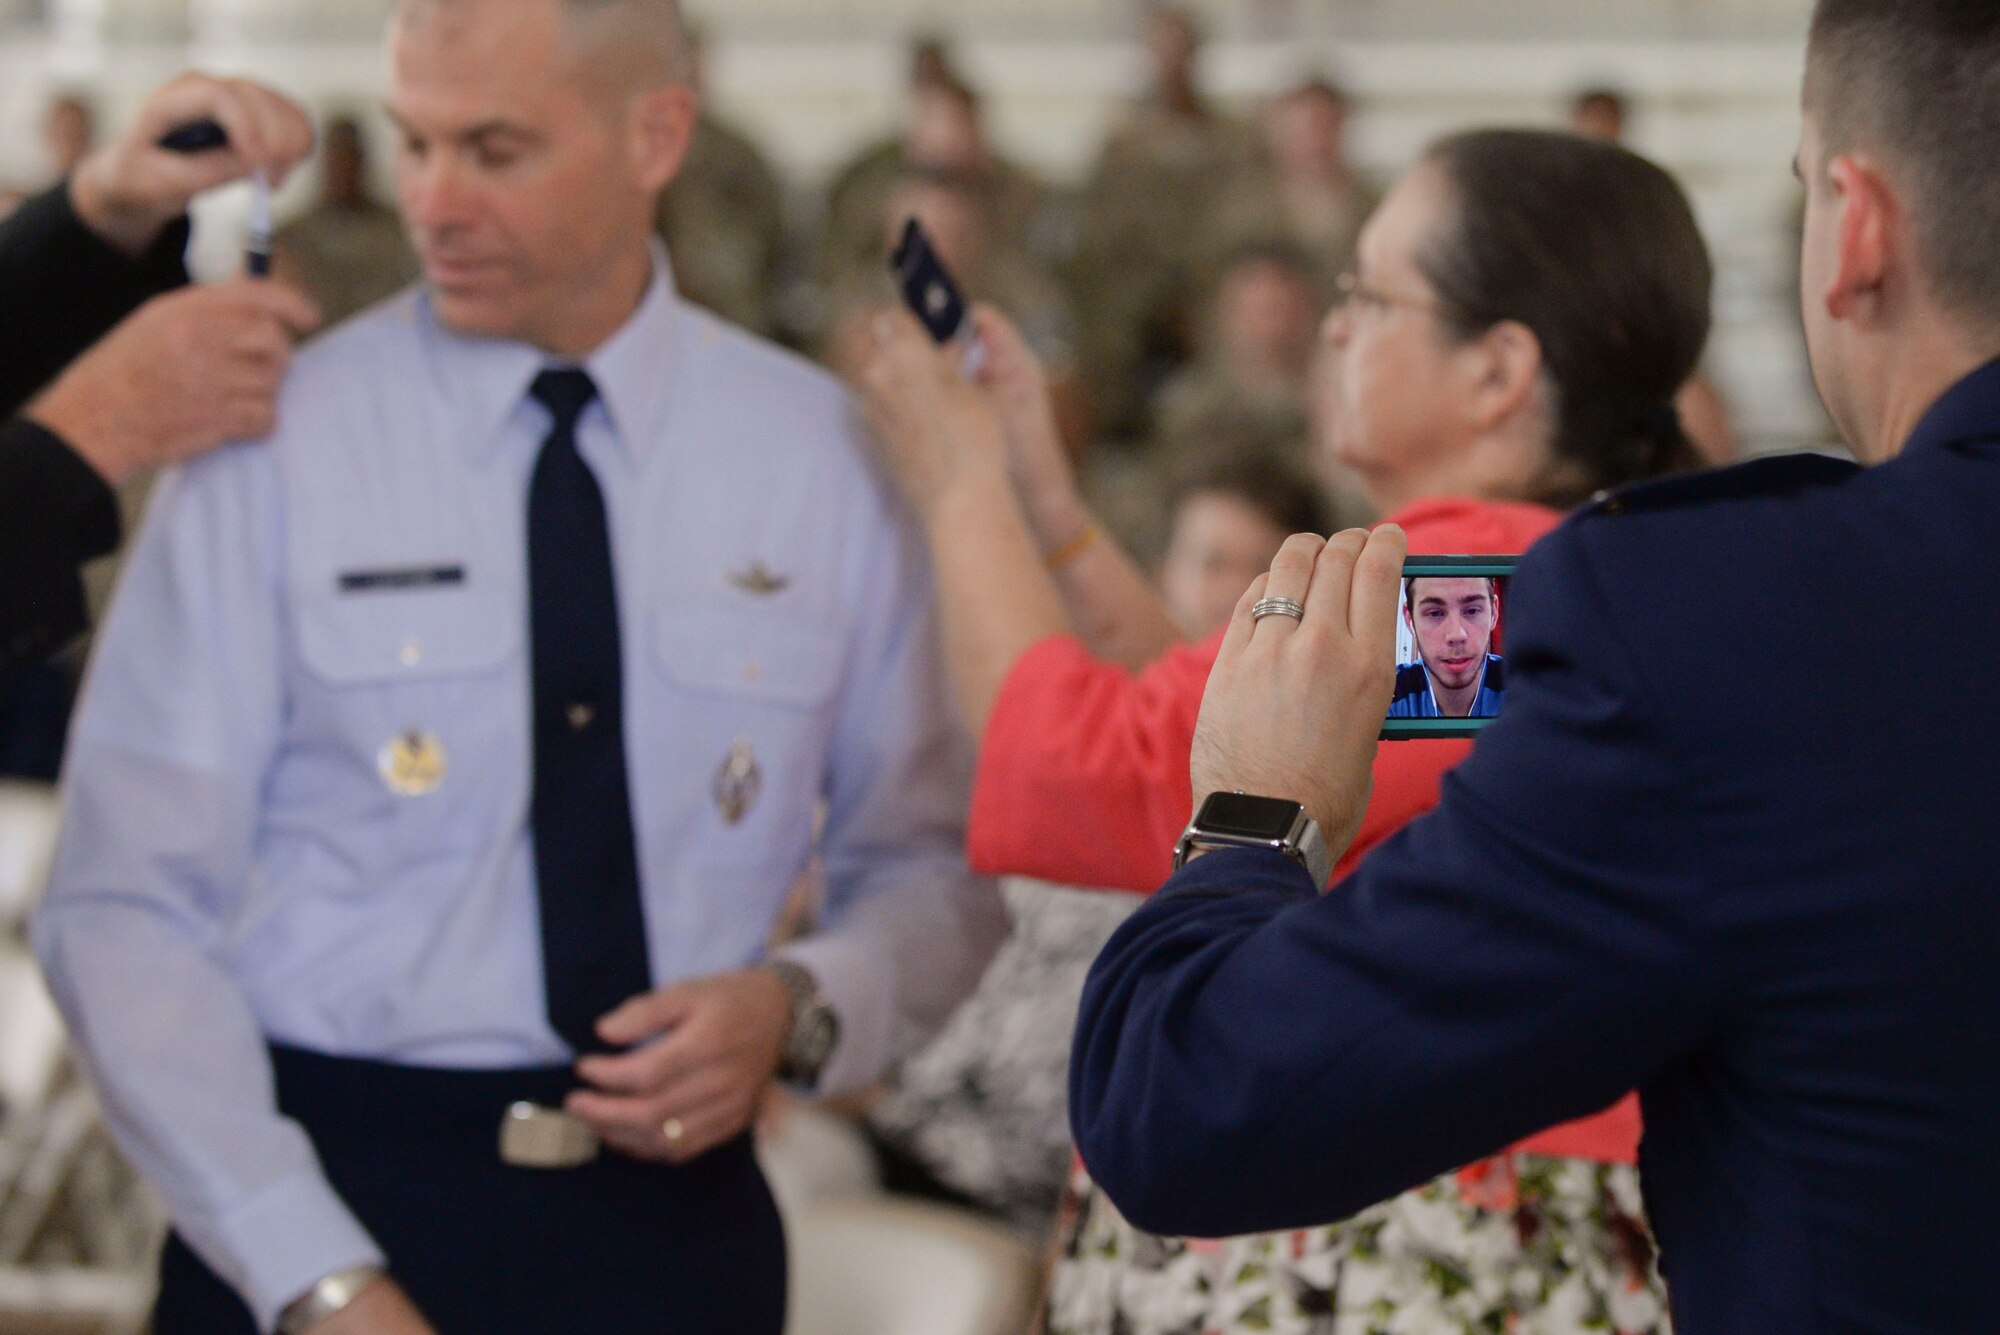 Michael Lutton’s father and mother-in-law place brigadier general rank on his epaulettes during his promotion ceremony at Minot Air Force Base, N.D., June 17, 2016. Lutton’s son Kyle was able to virtually attend the ceremony. (U.S. Air Force photo/Airman 1st Class Jessica Weissman)